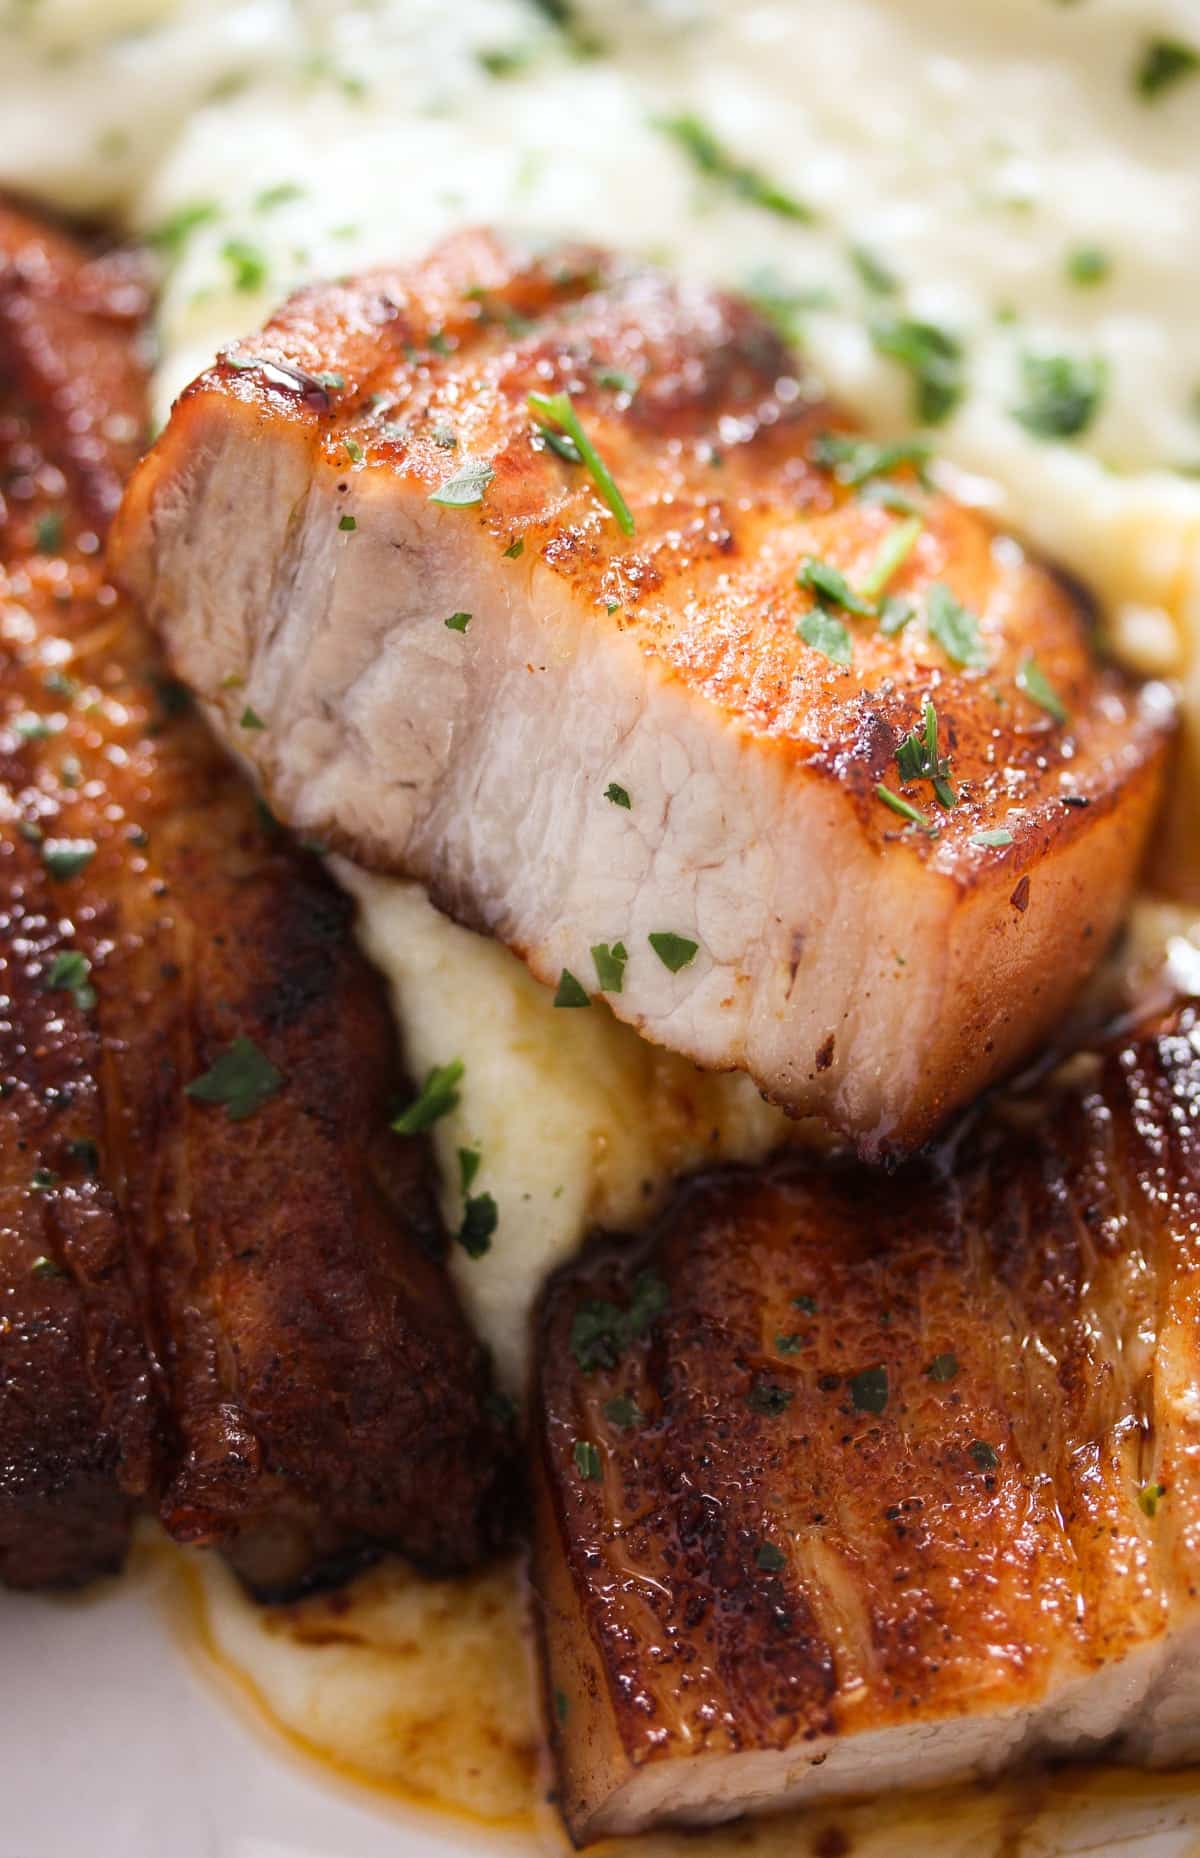 pork belly strips sliced and served with mashed potatoes.